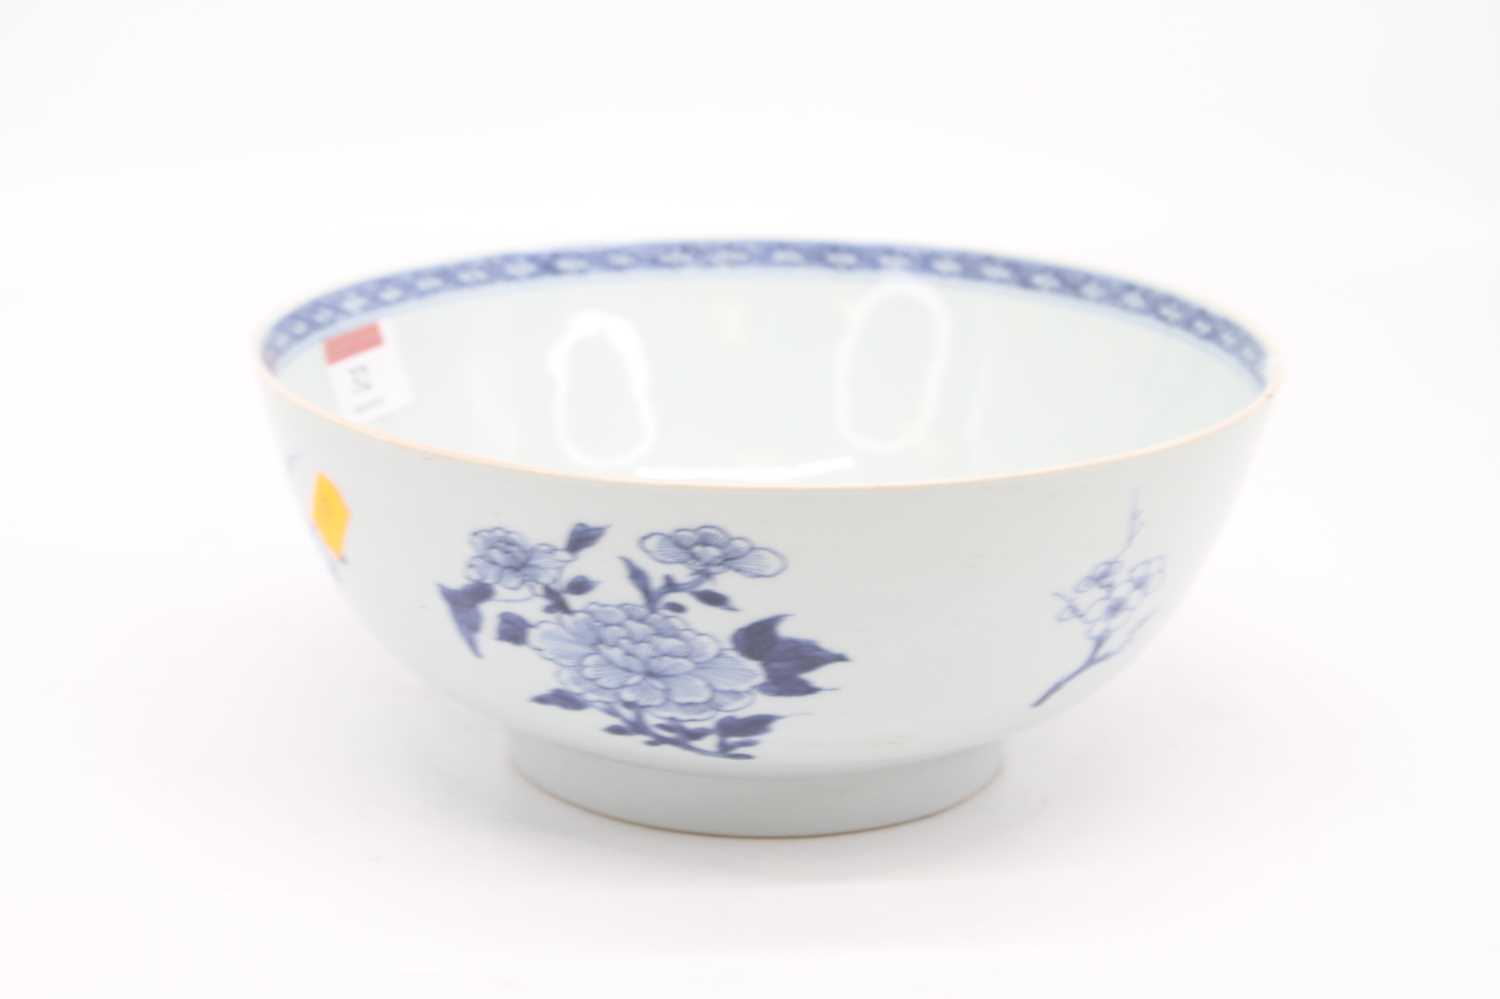 An 18th century Chinese blue and white porcelain bowl, decorated with flowers, dia. 24cm (a/f) - Image 2 of 3